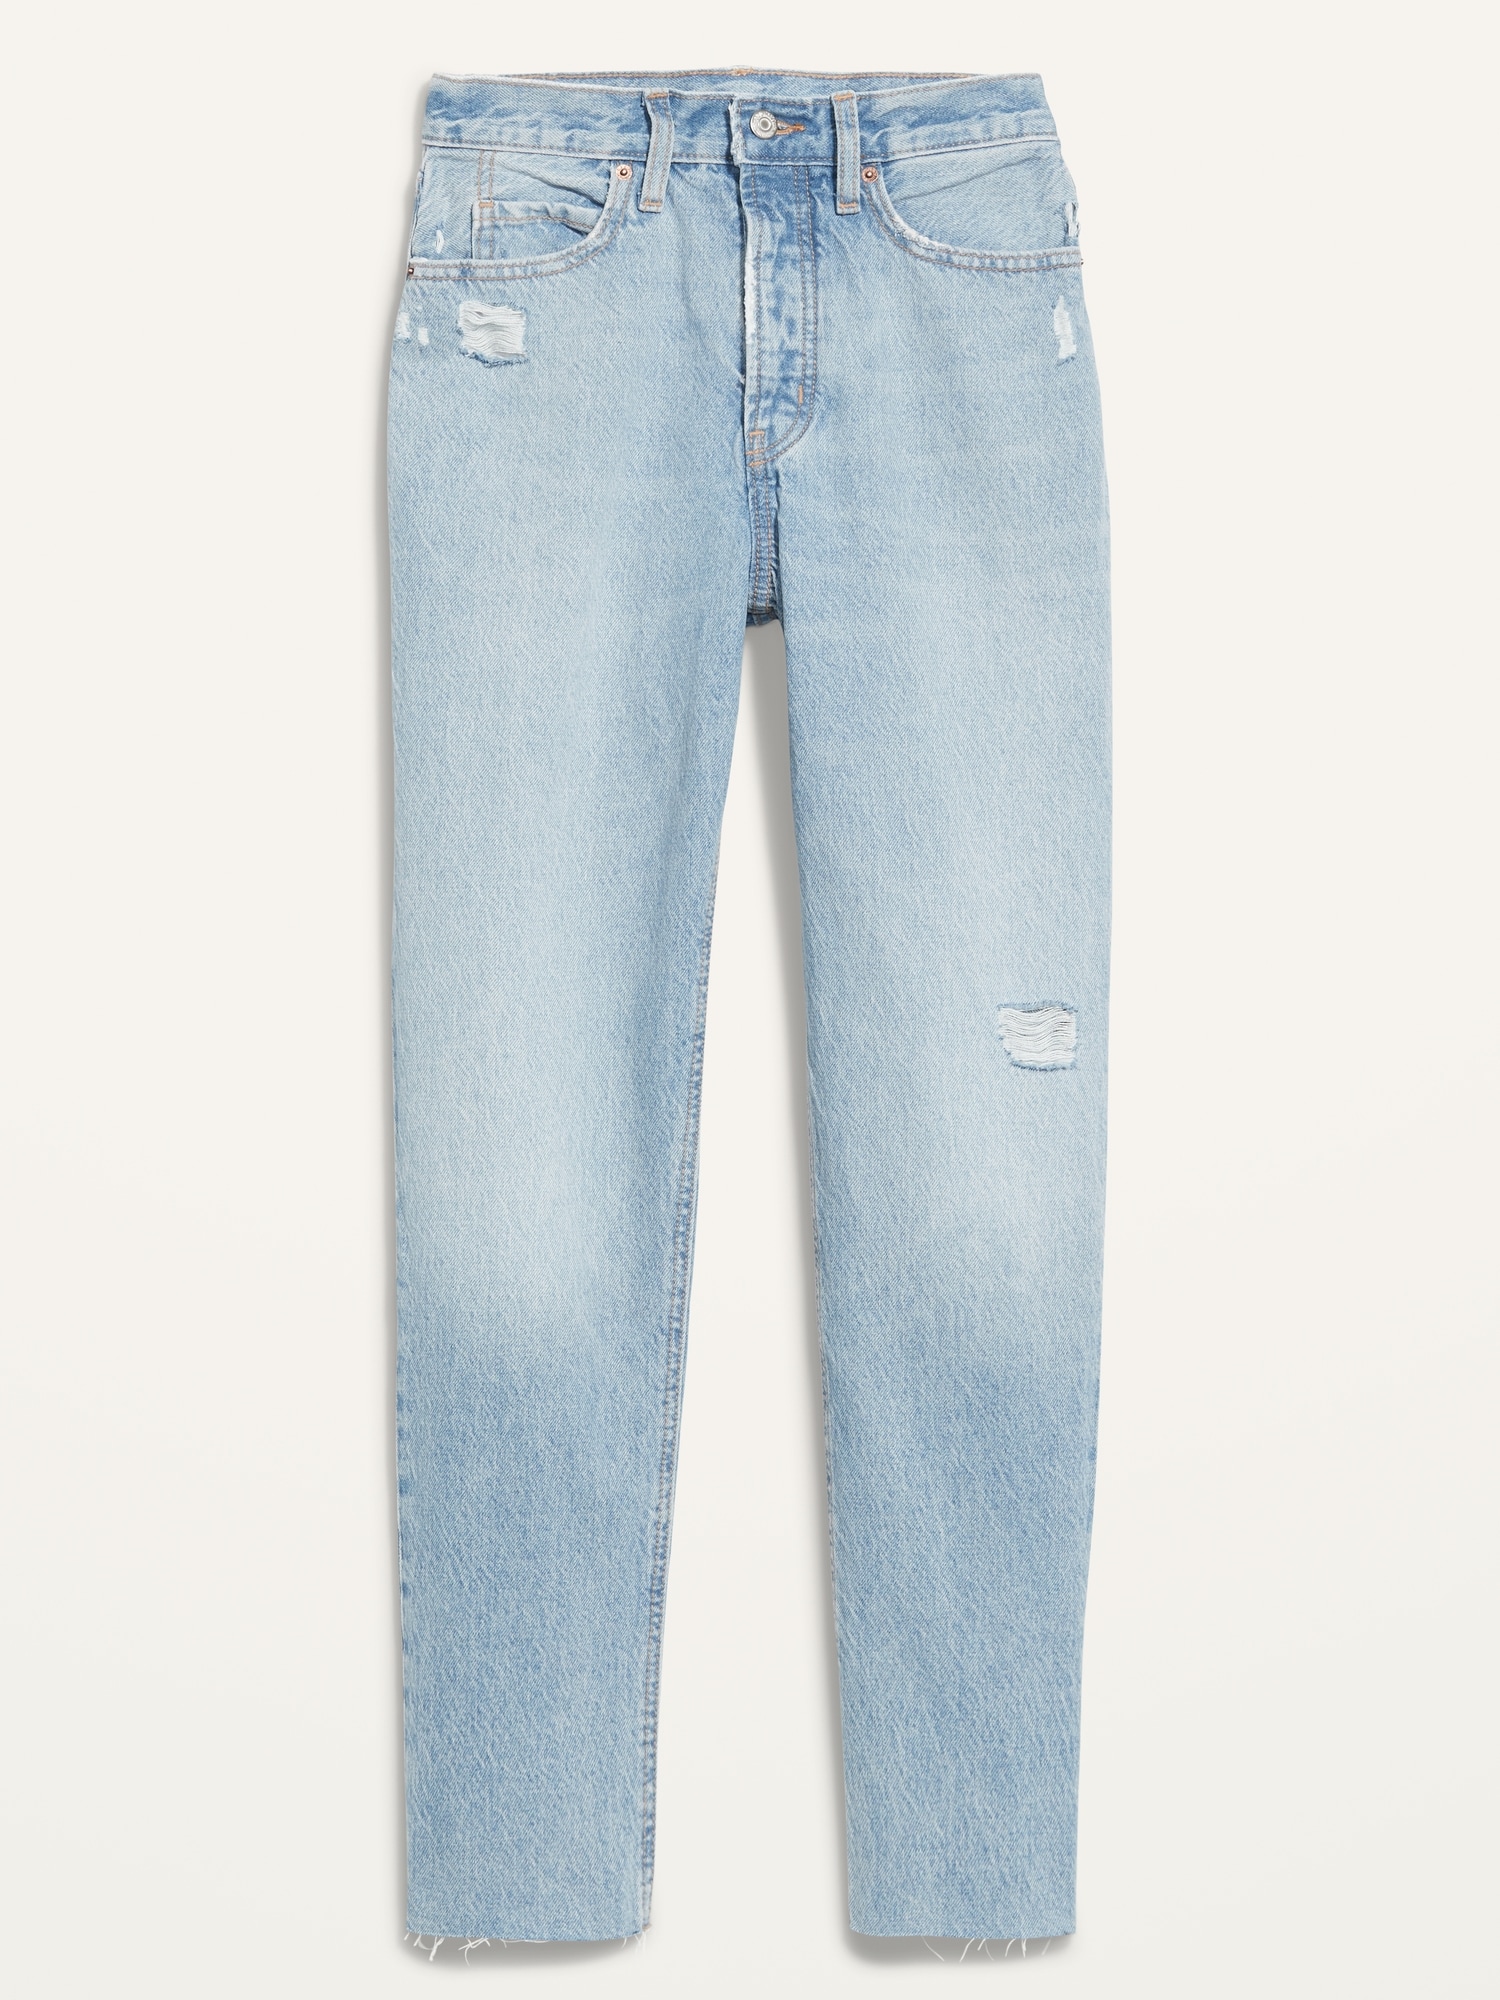 Extra High-Waisted Button-Fly Sky-Hi Straight Non-Stretch Cut-Off Jeans ...